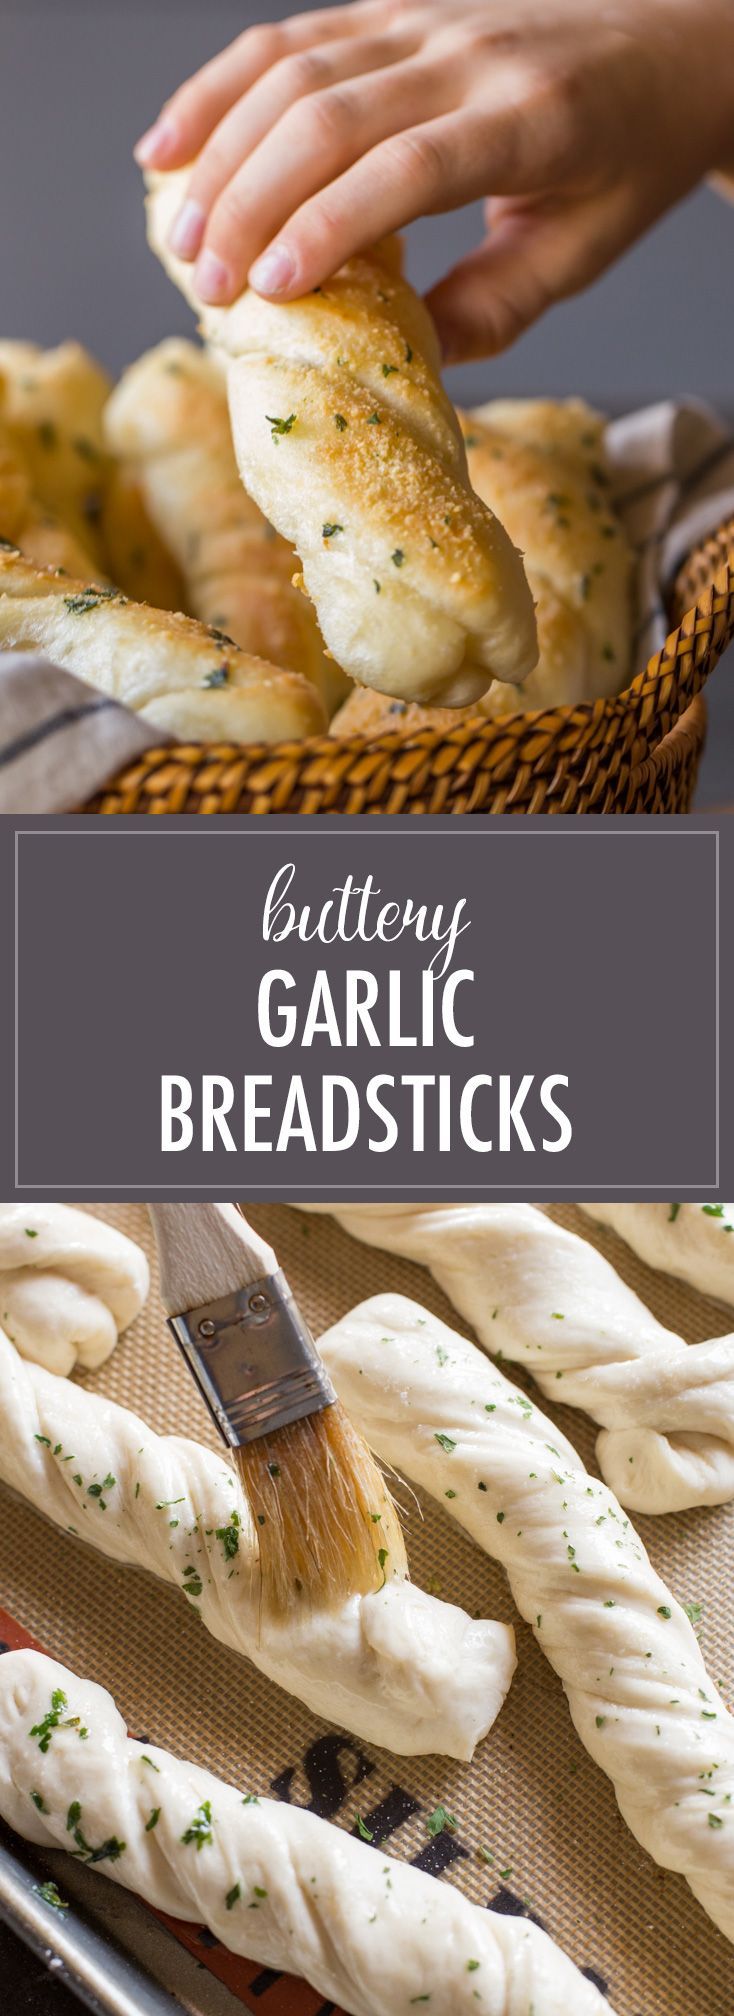 Fresh Buttery Garlic Breadsticks right out of the oven are hard to beat! I’ll show you just how to make them step by step!